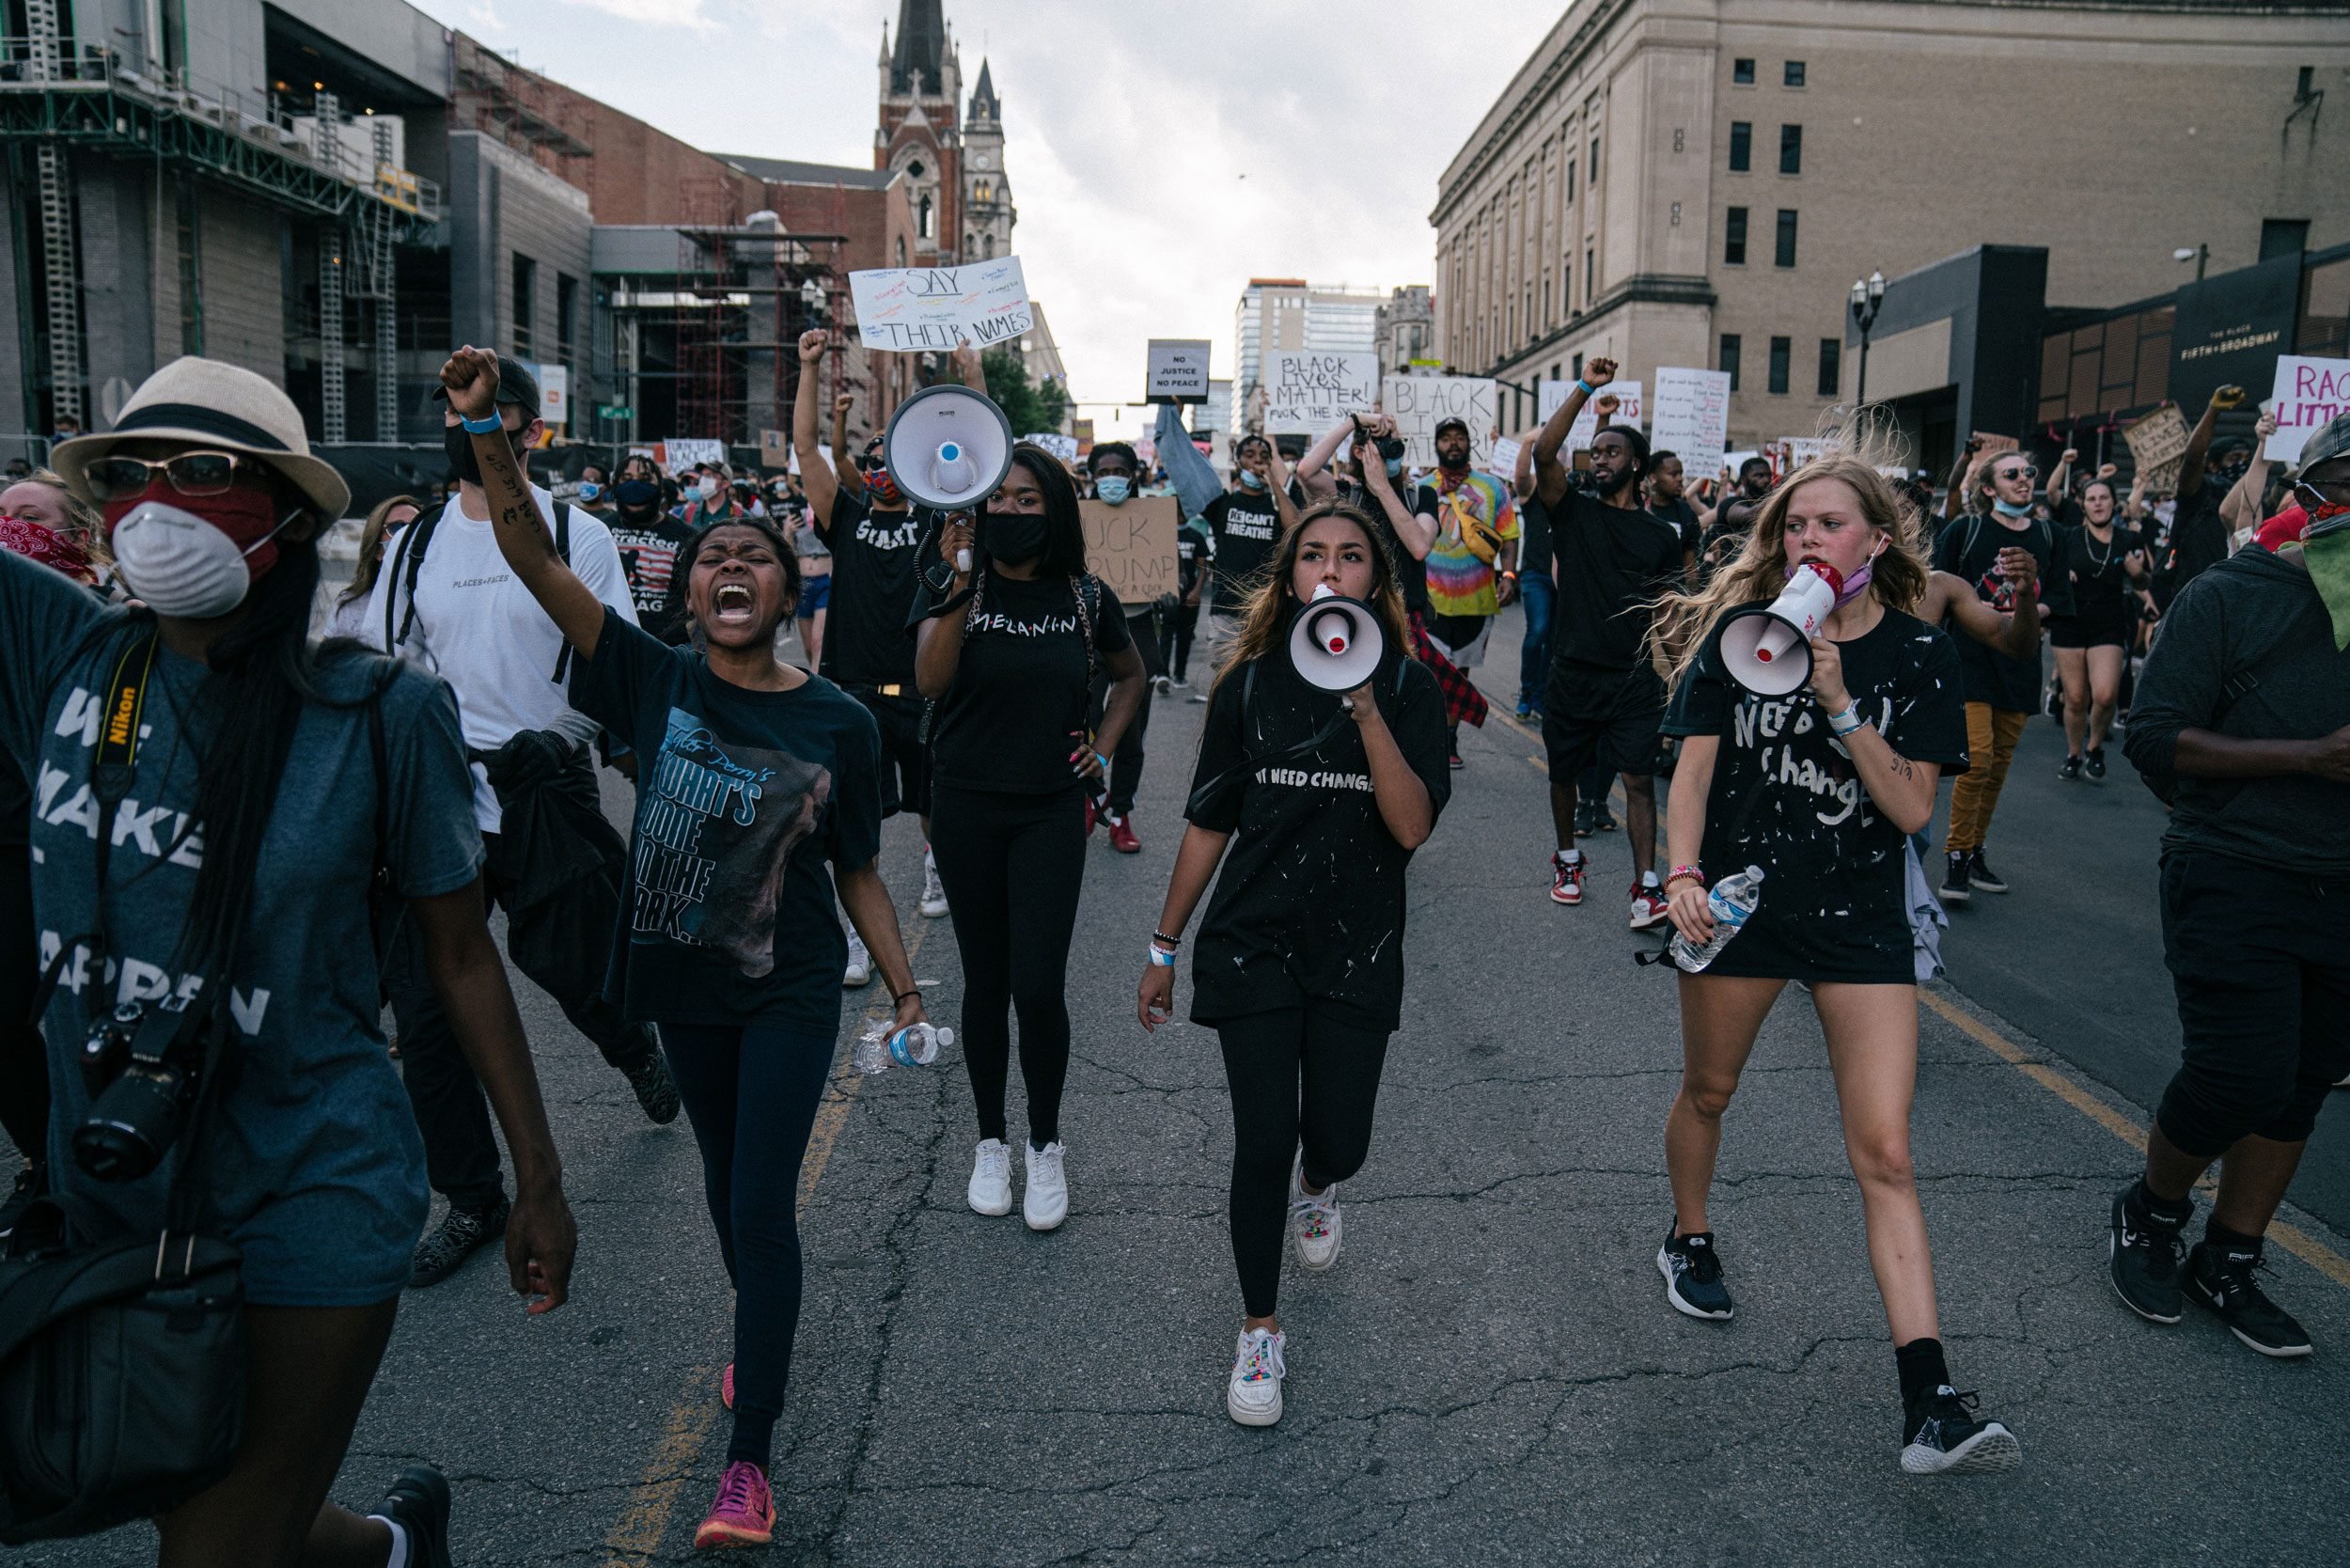 teens lead protest in nashville